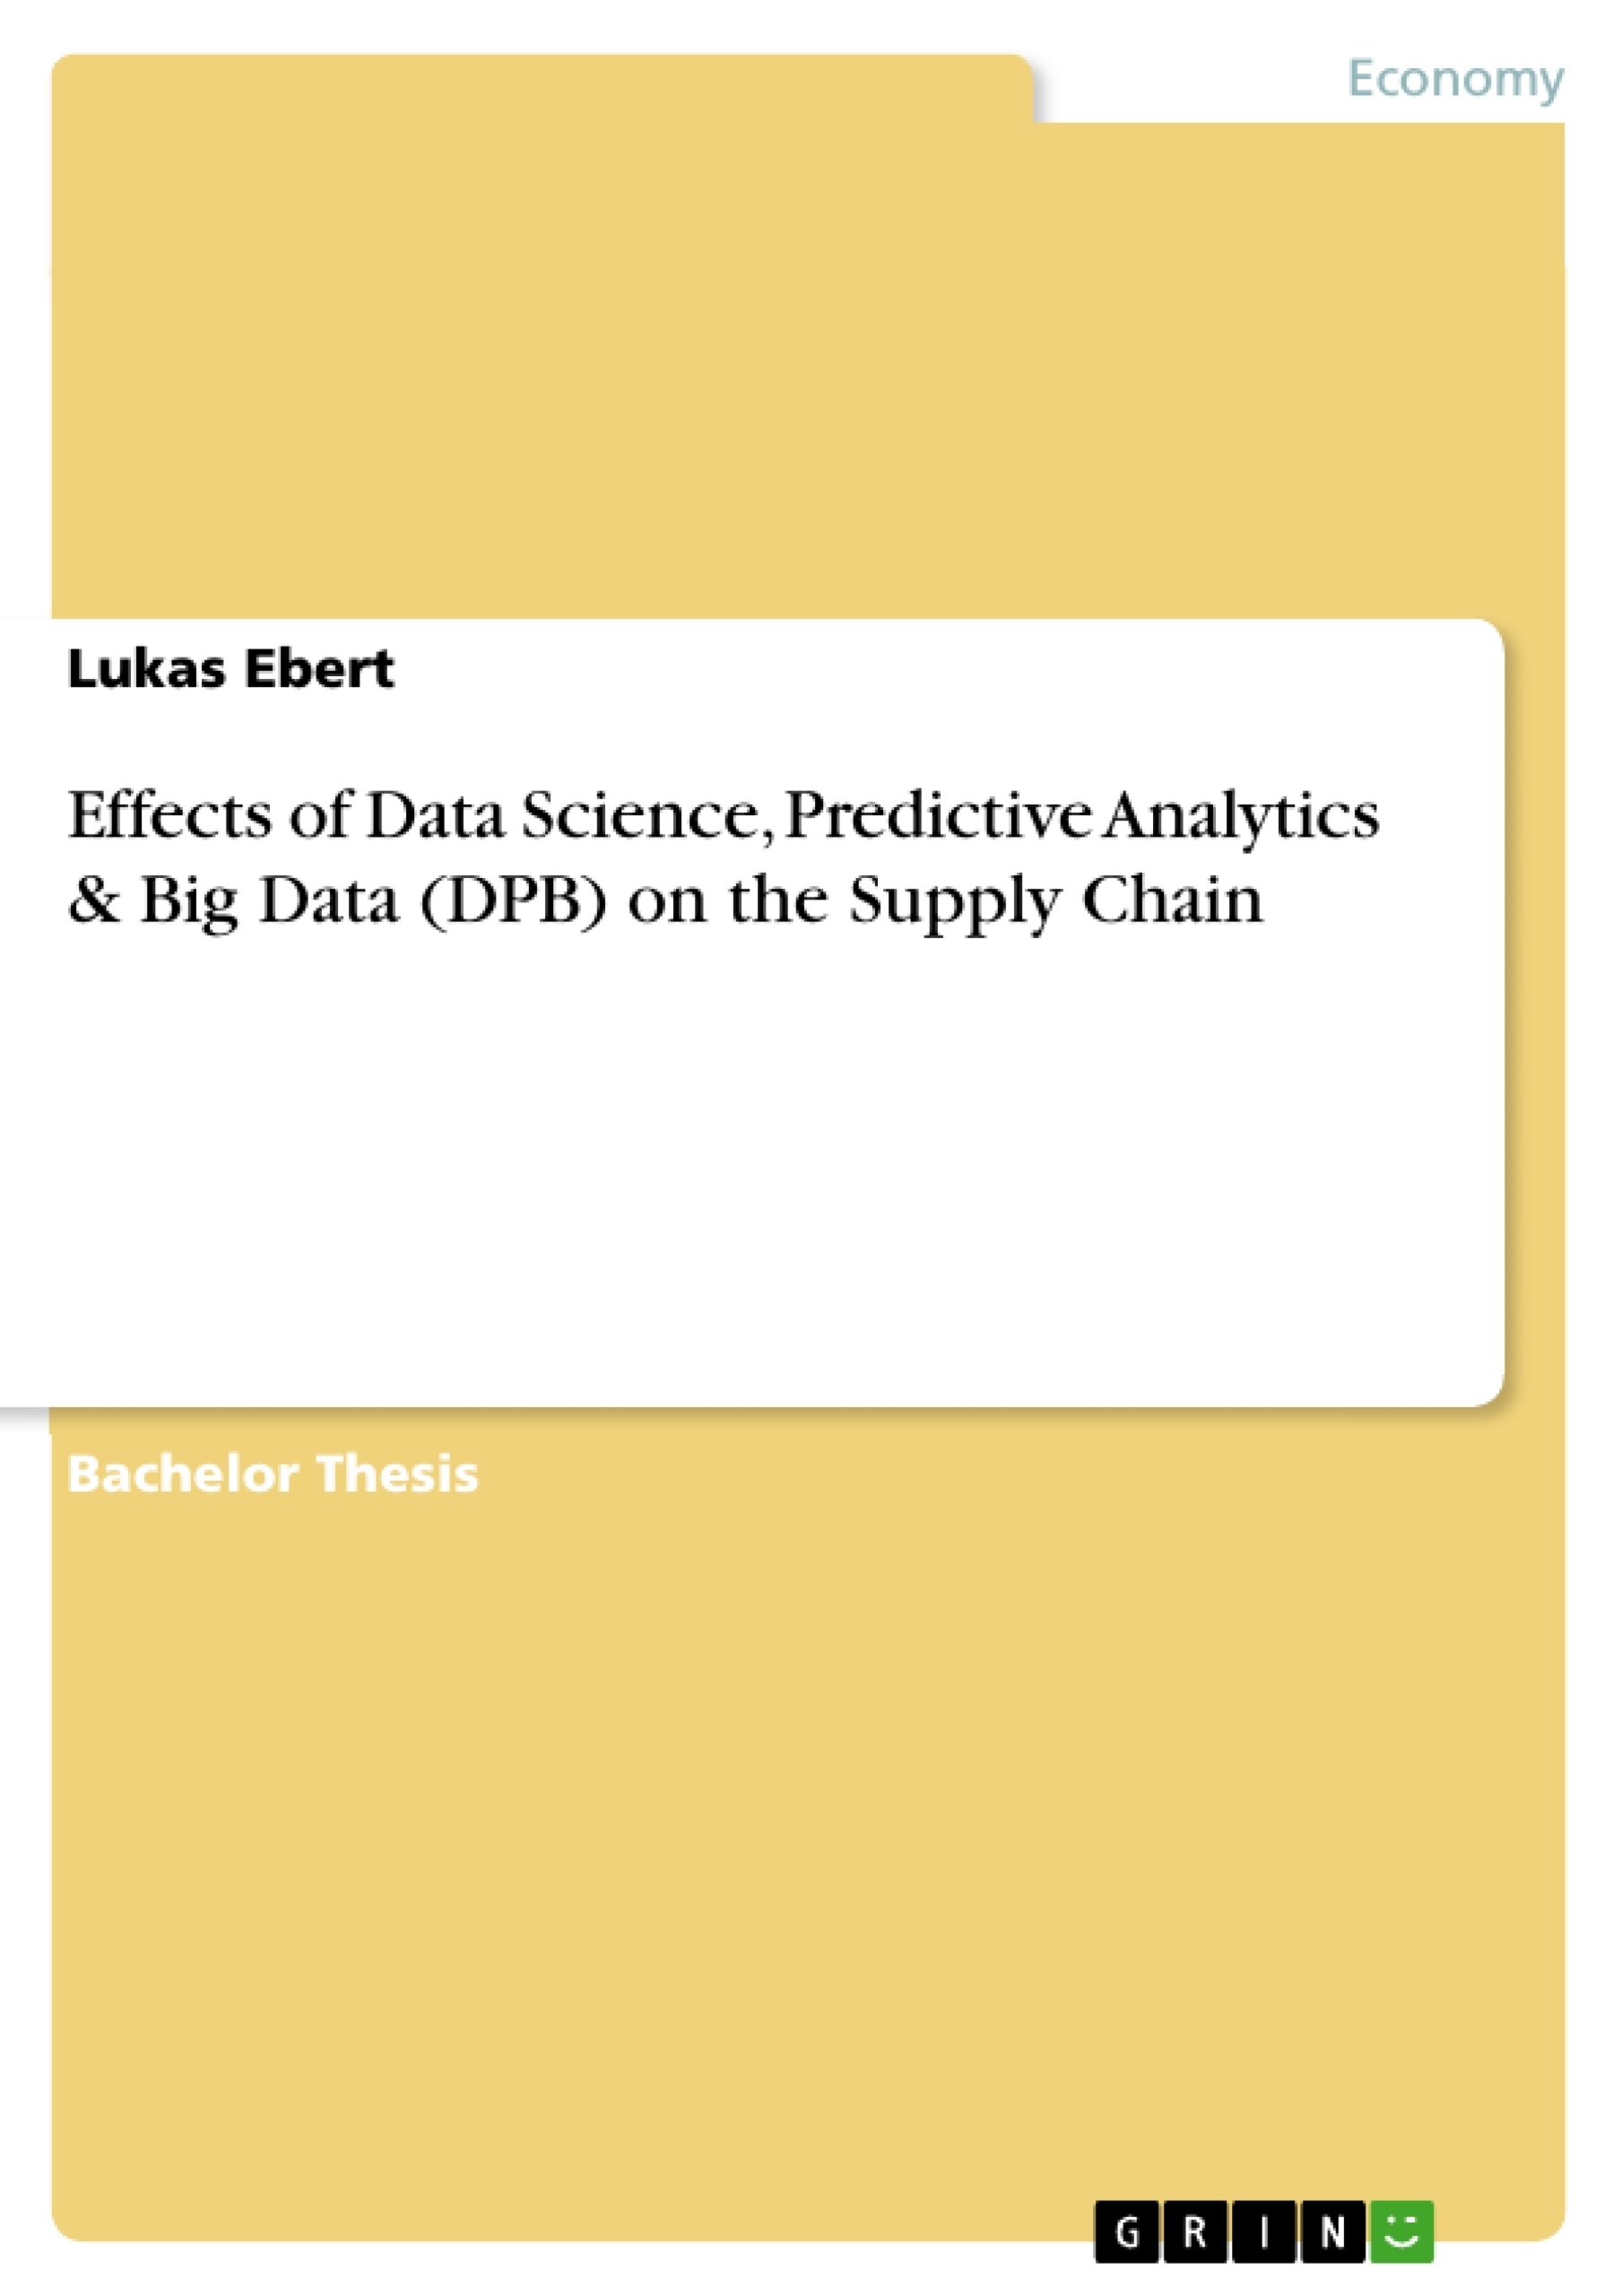 Title: Effects of Data Science, Predictive Analytics & Big Data (DPB) on the Supply Chain